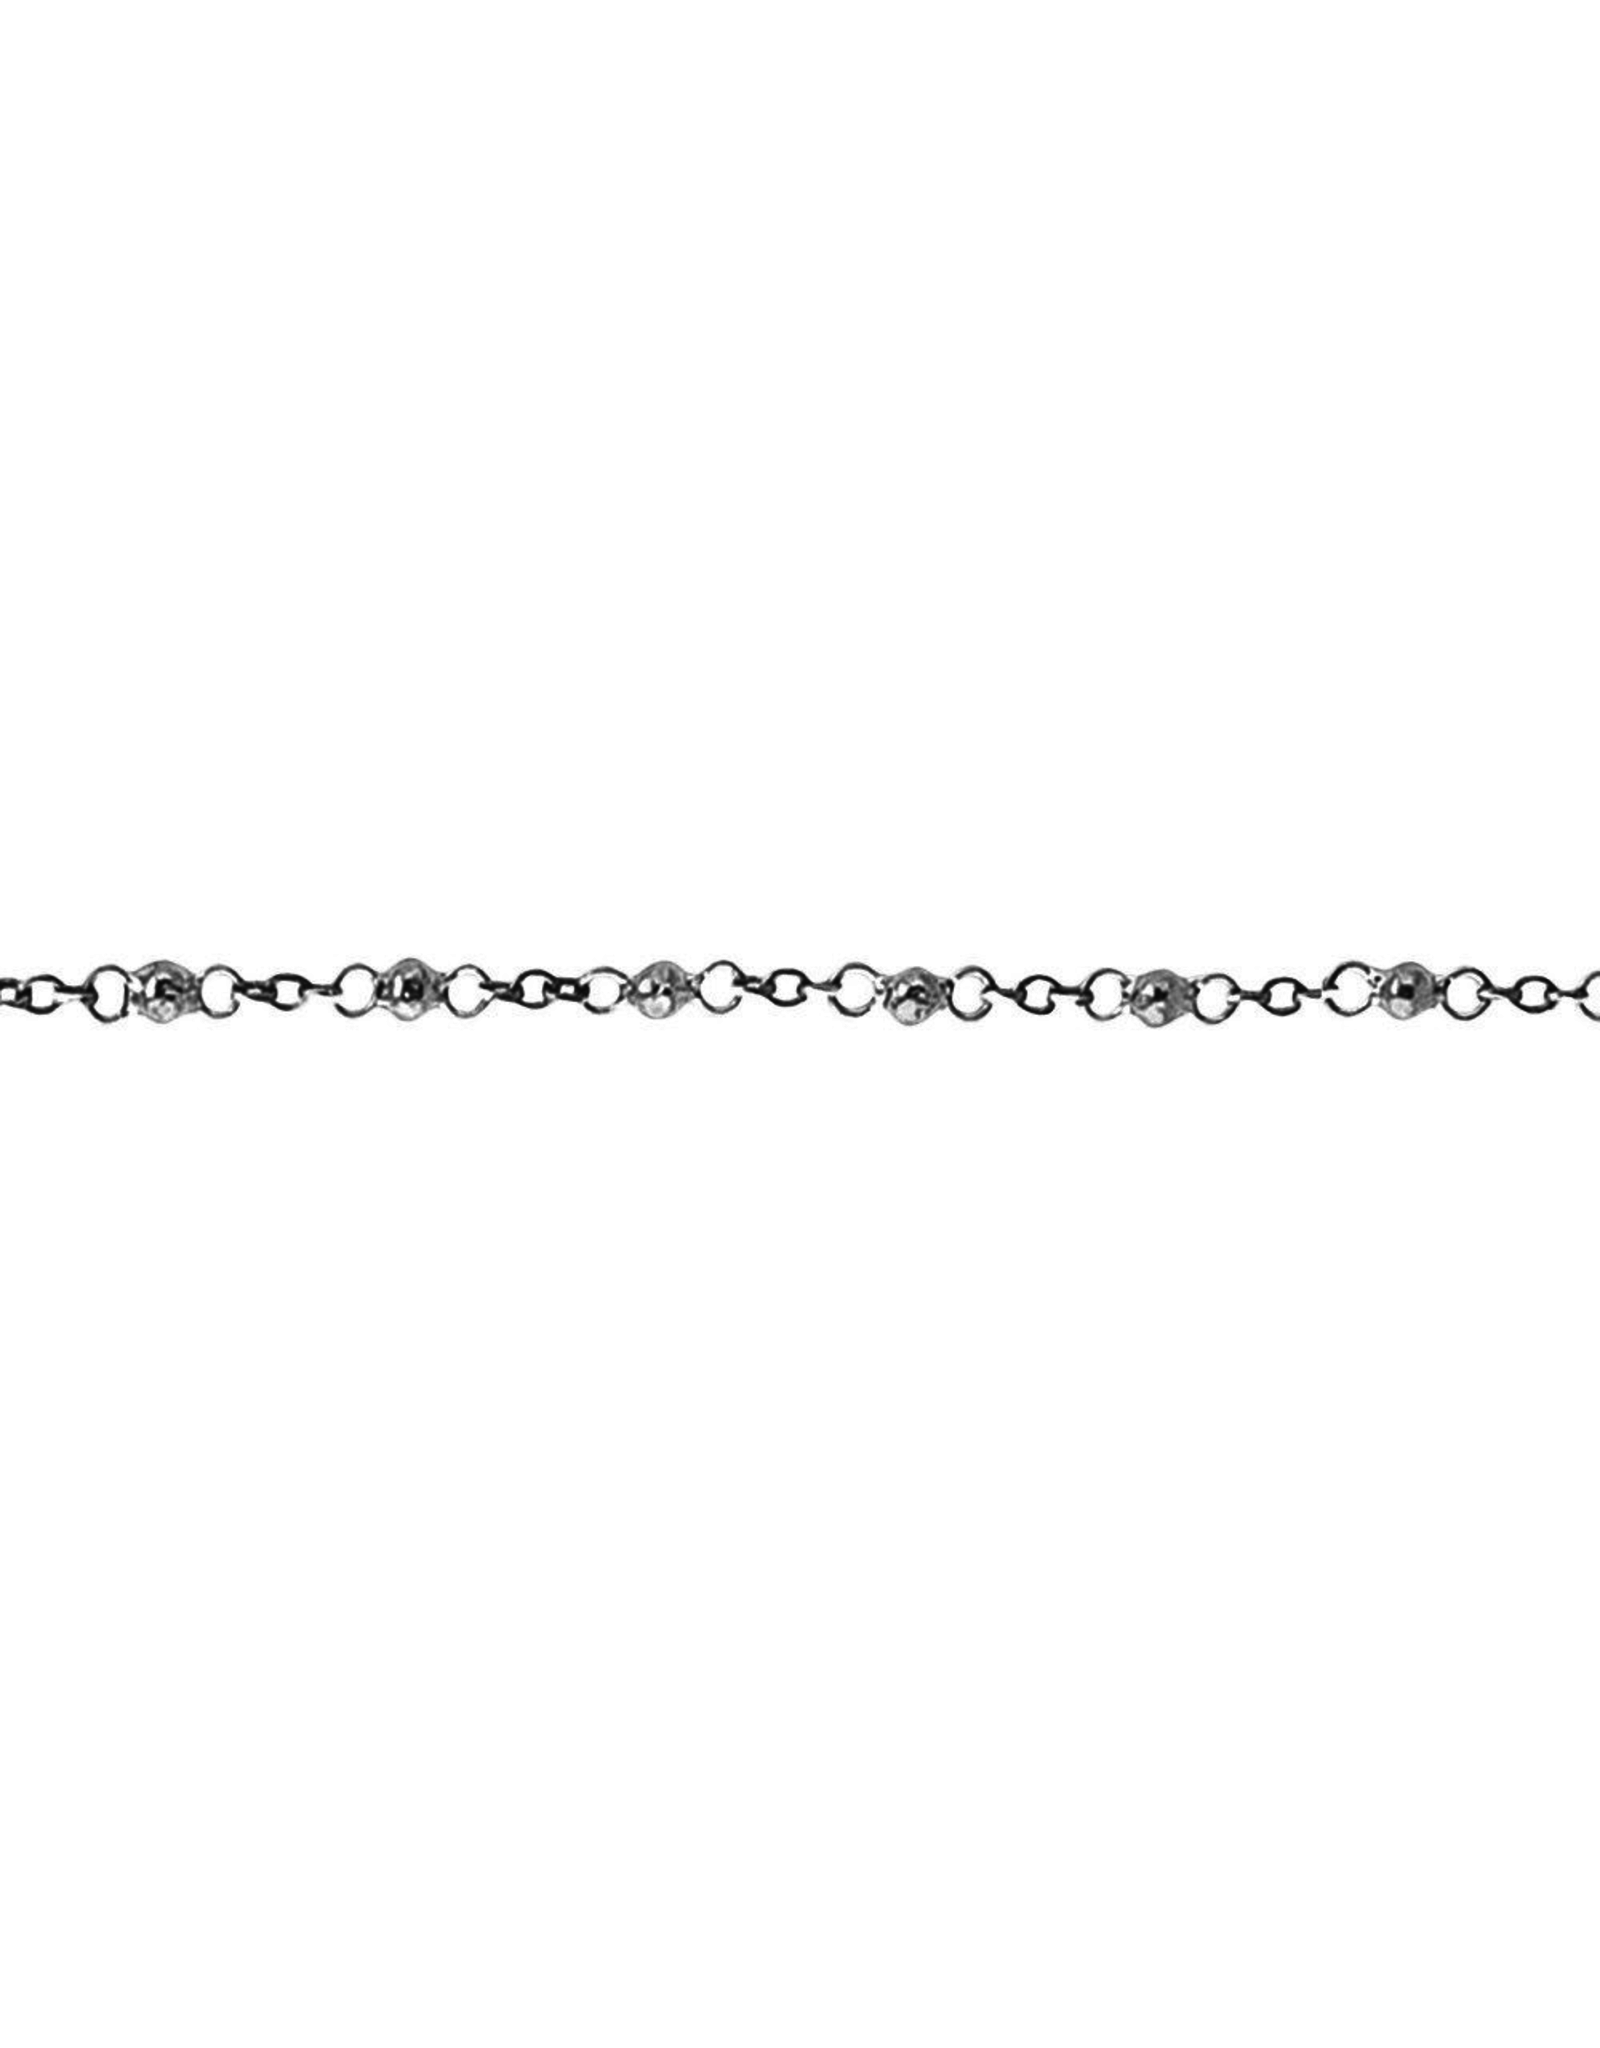 Waxing Poetic® Jewelry Slip Stream Chain 18 inch-Sterling Silver